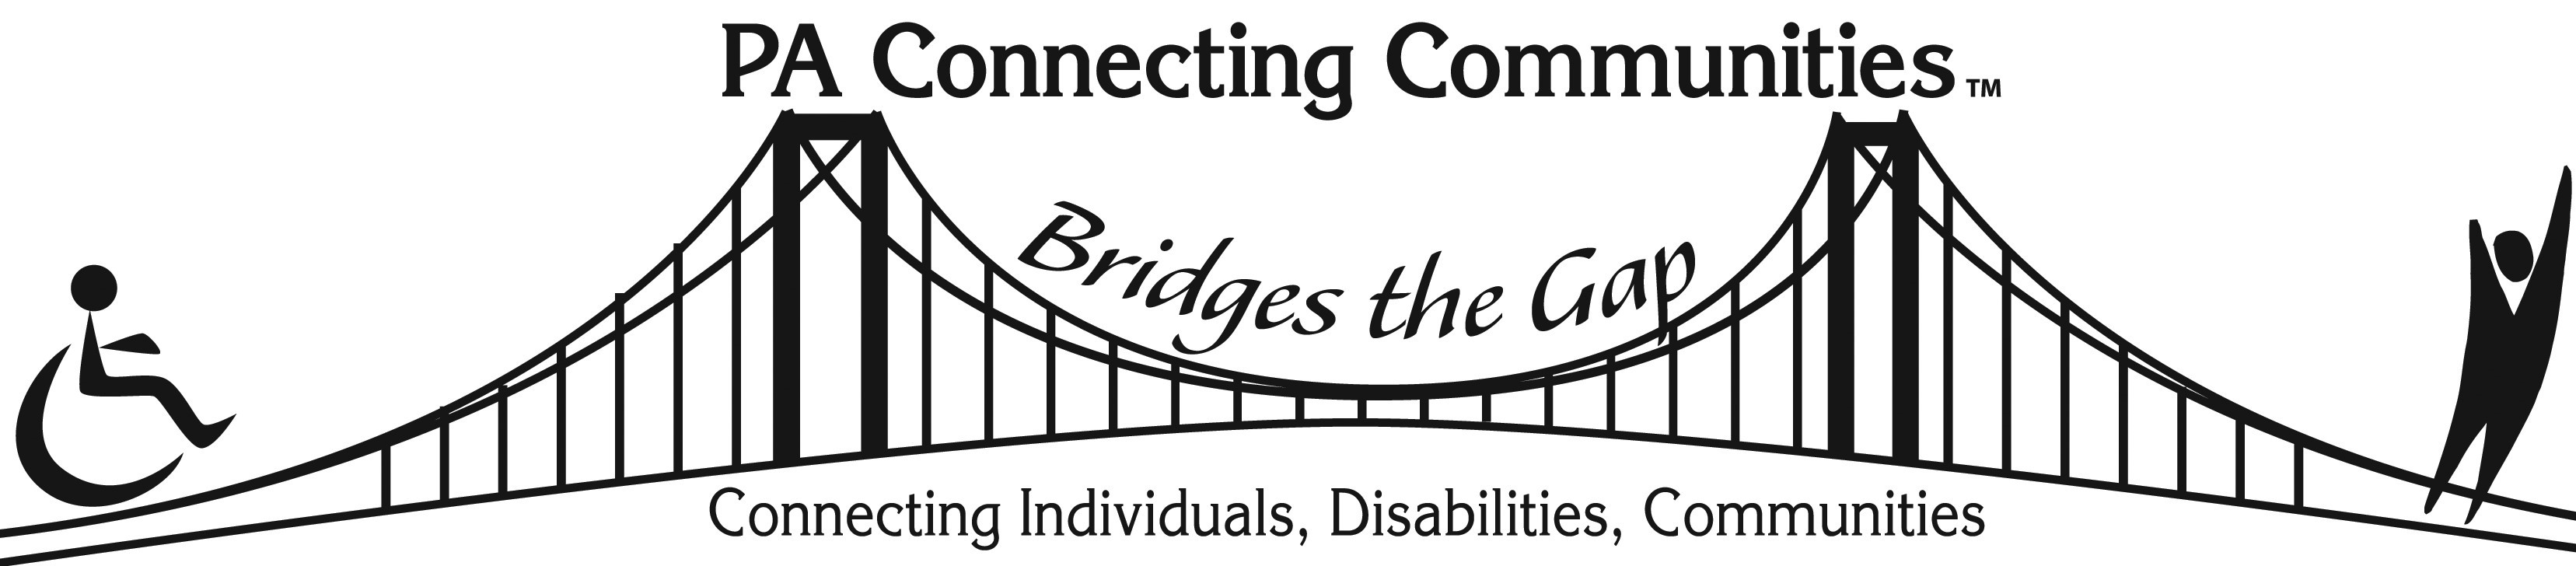 PA Connecting Communities logo